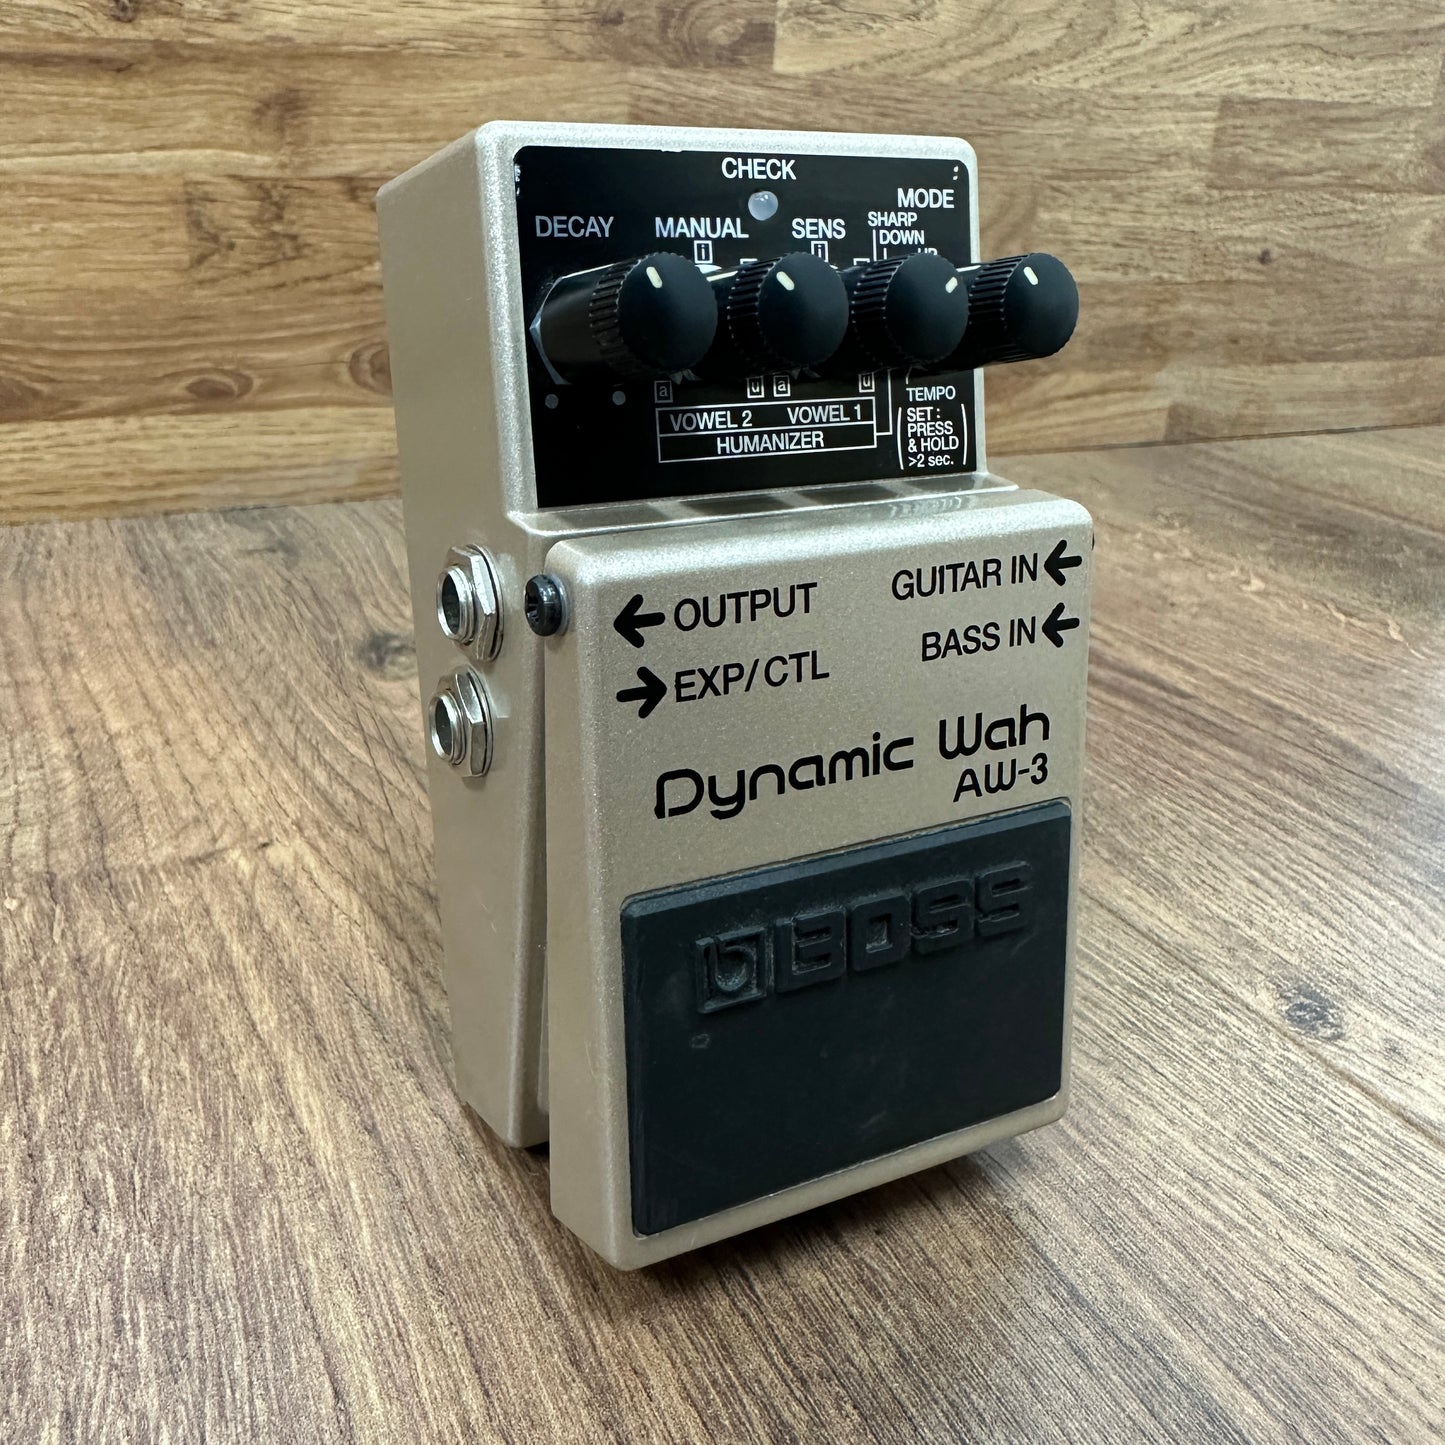 Pre-Owned Boss AW-3 Dynamic Wah Pedal